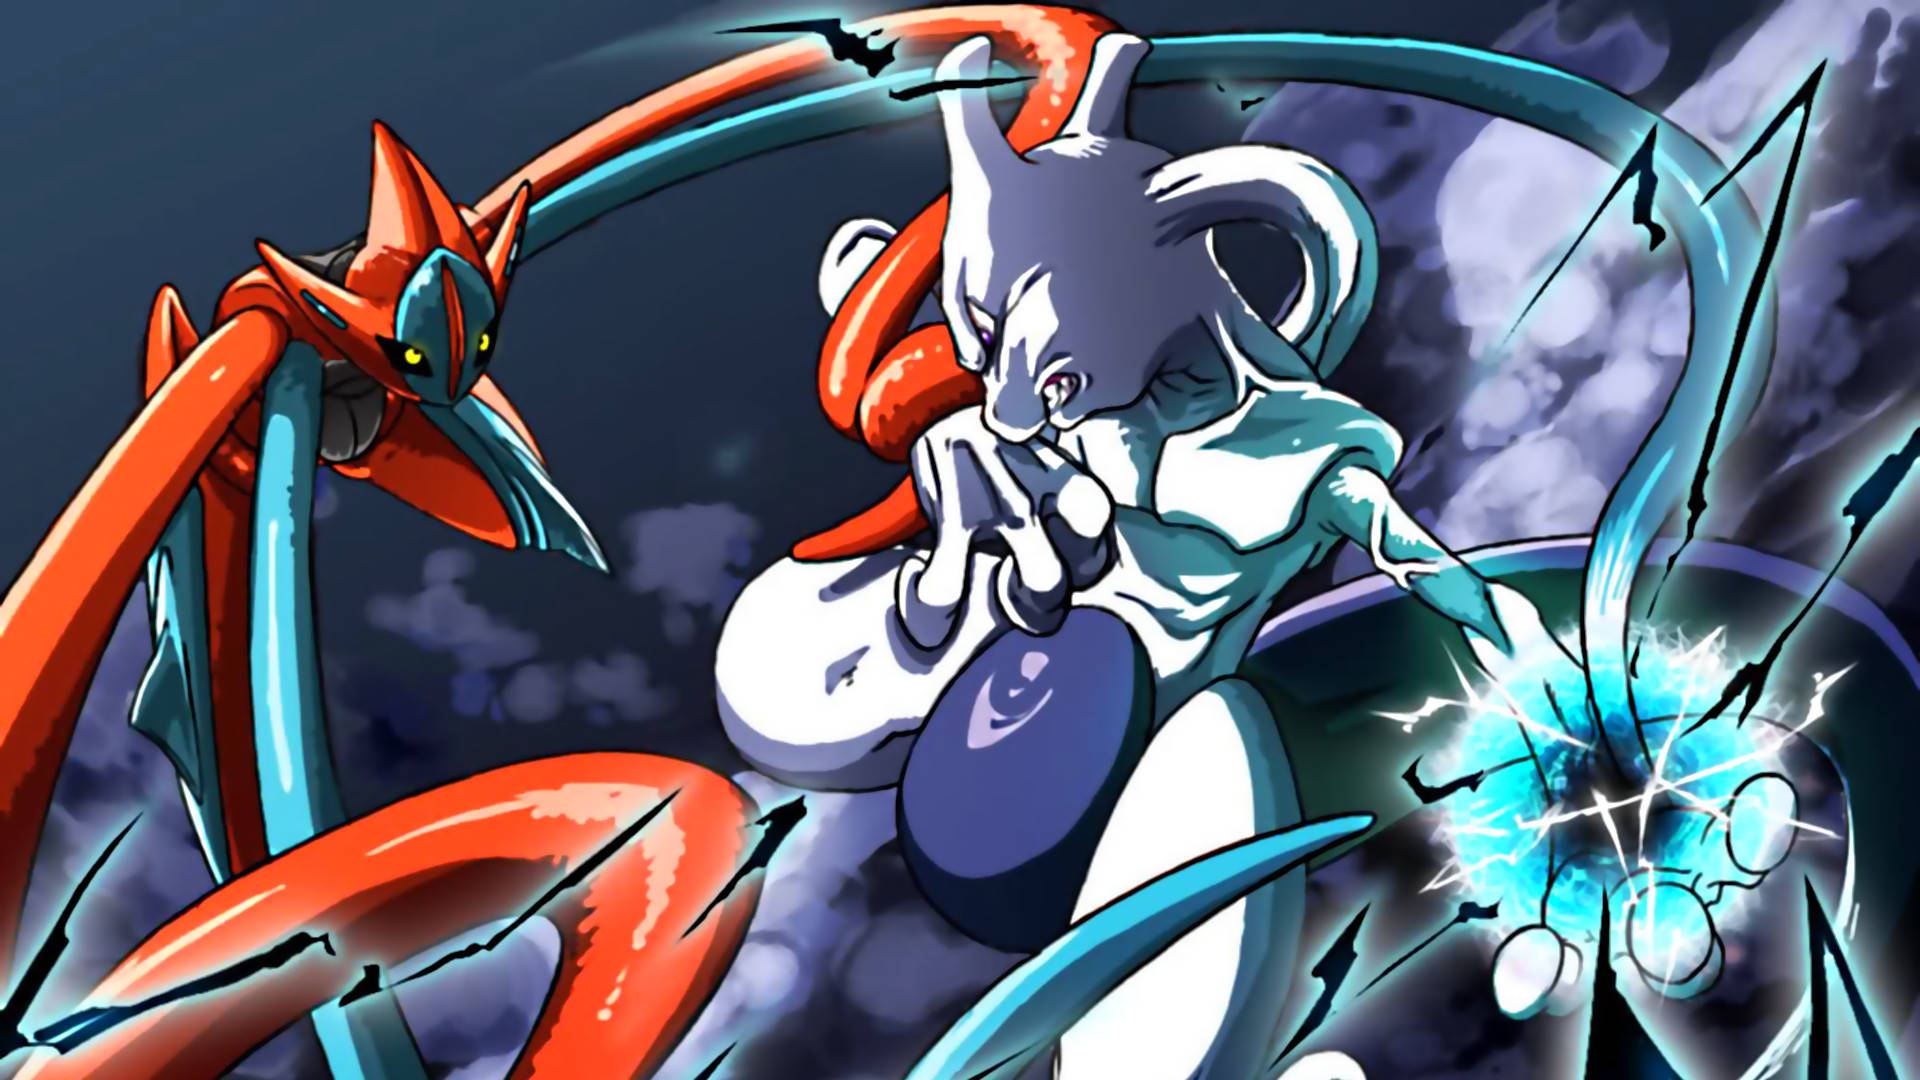 Shiny Mewtwo Entagled By Deoxys Wallpaper